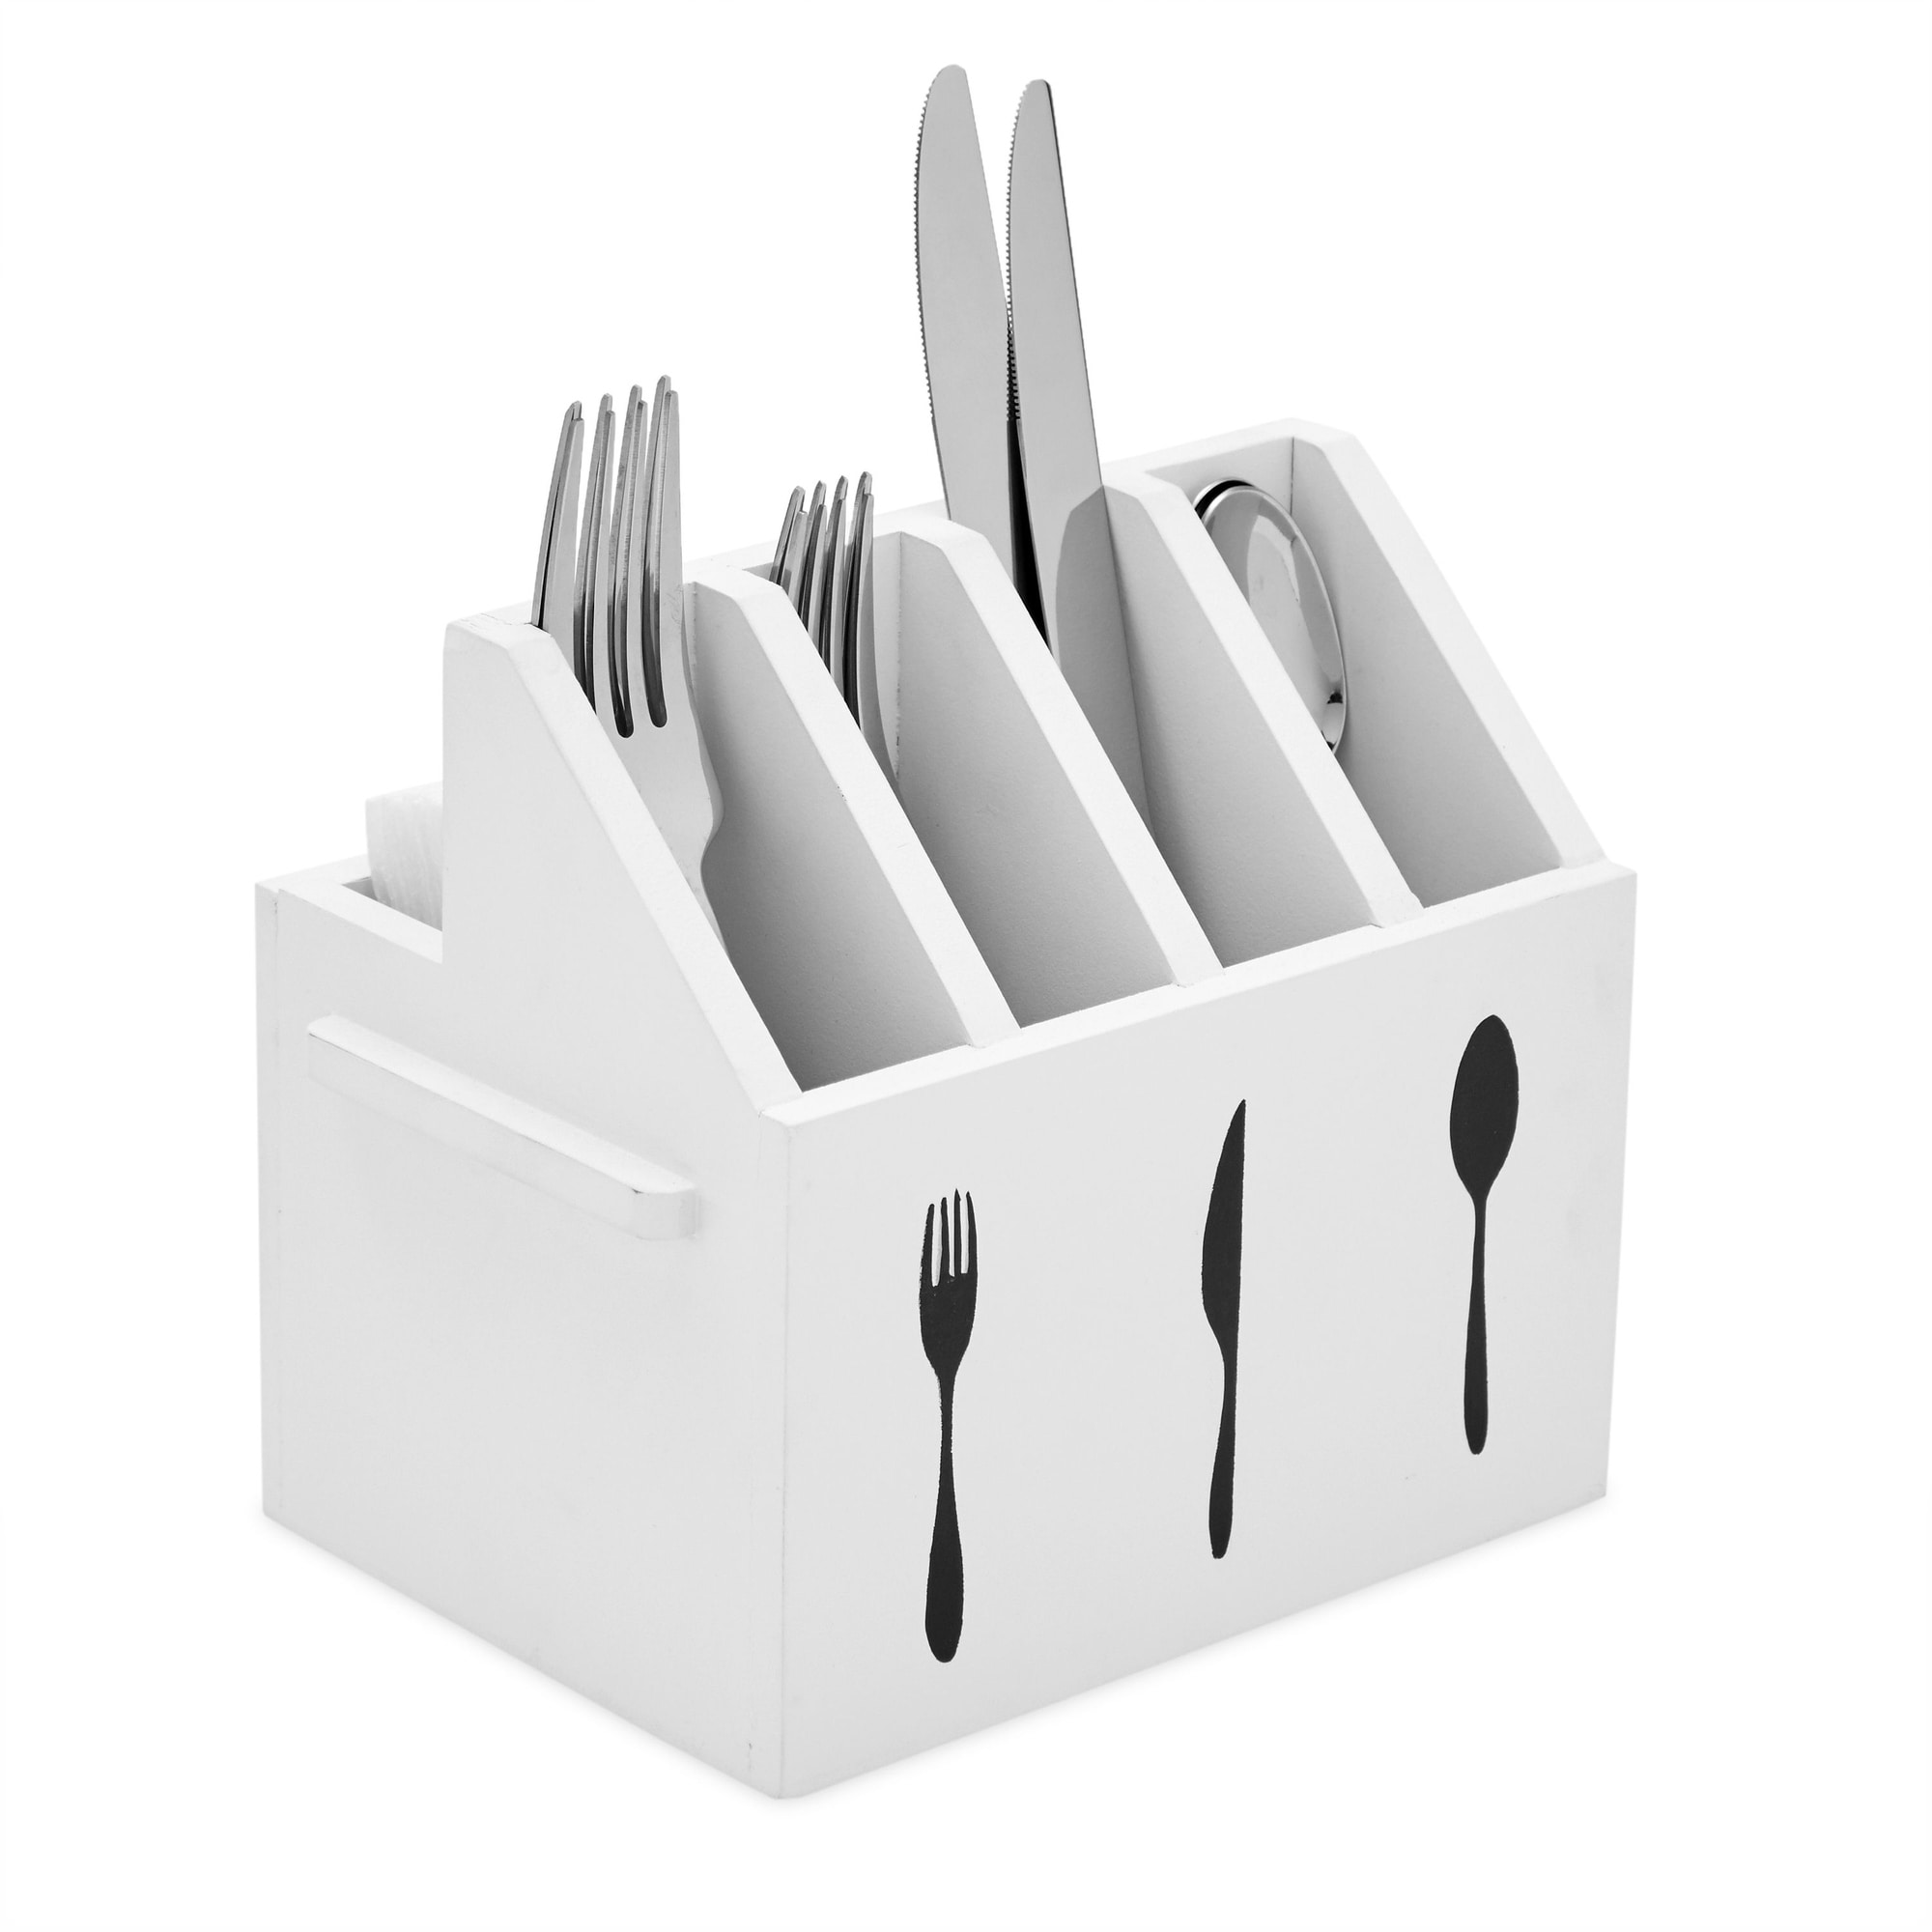 https://ak1.ostkcdn.com/images/products/is/images/direct/c9e1ec9adc7bfb3c8803346dca71fbaf2e0380d7/Wooden-Utensil-Holder%2C-Silverware-Caddy-for-Kitchen-%287-x-5.5-x-6.6-In%2C-White%29.jpg